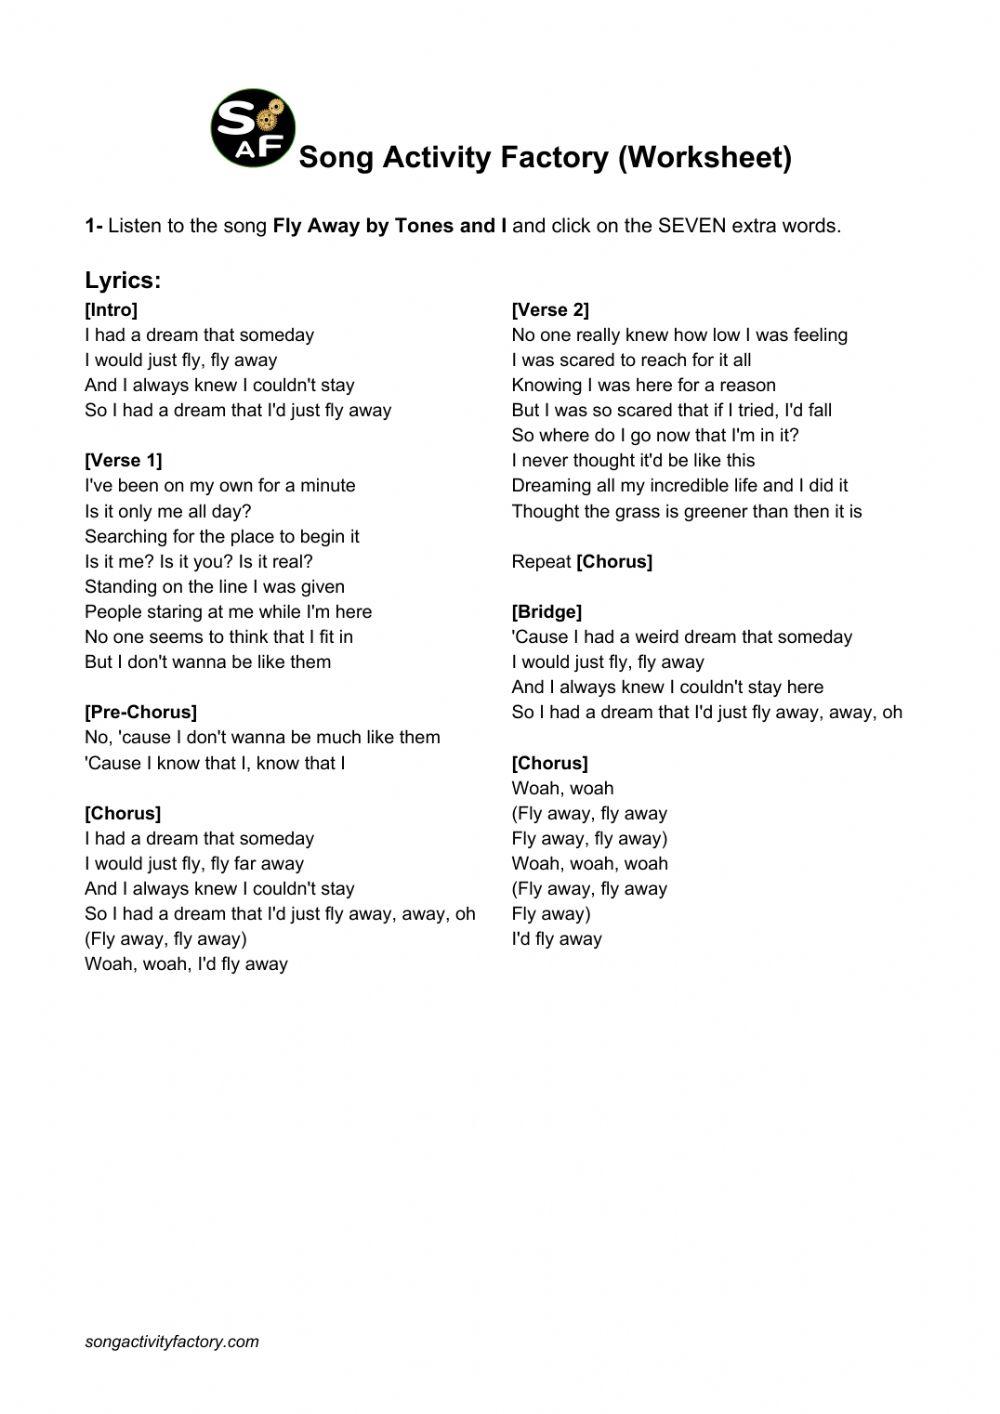 Song Activity Factory Worksheet